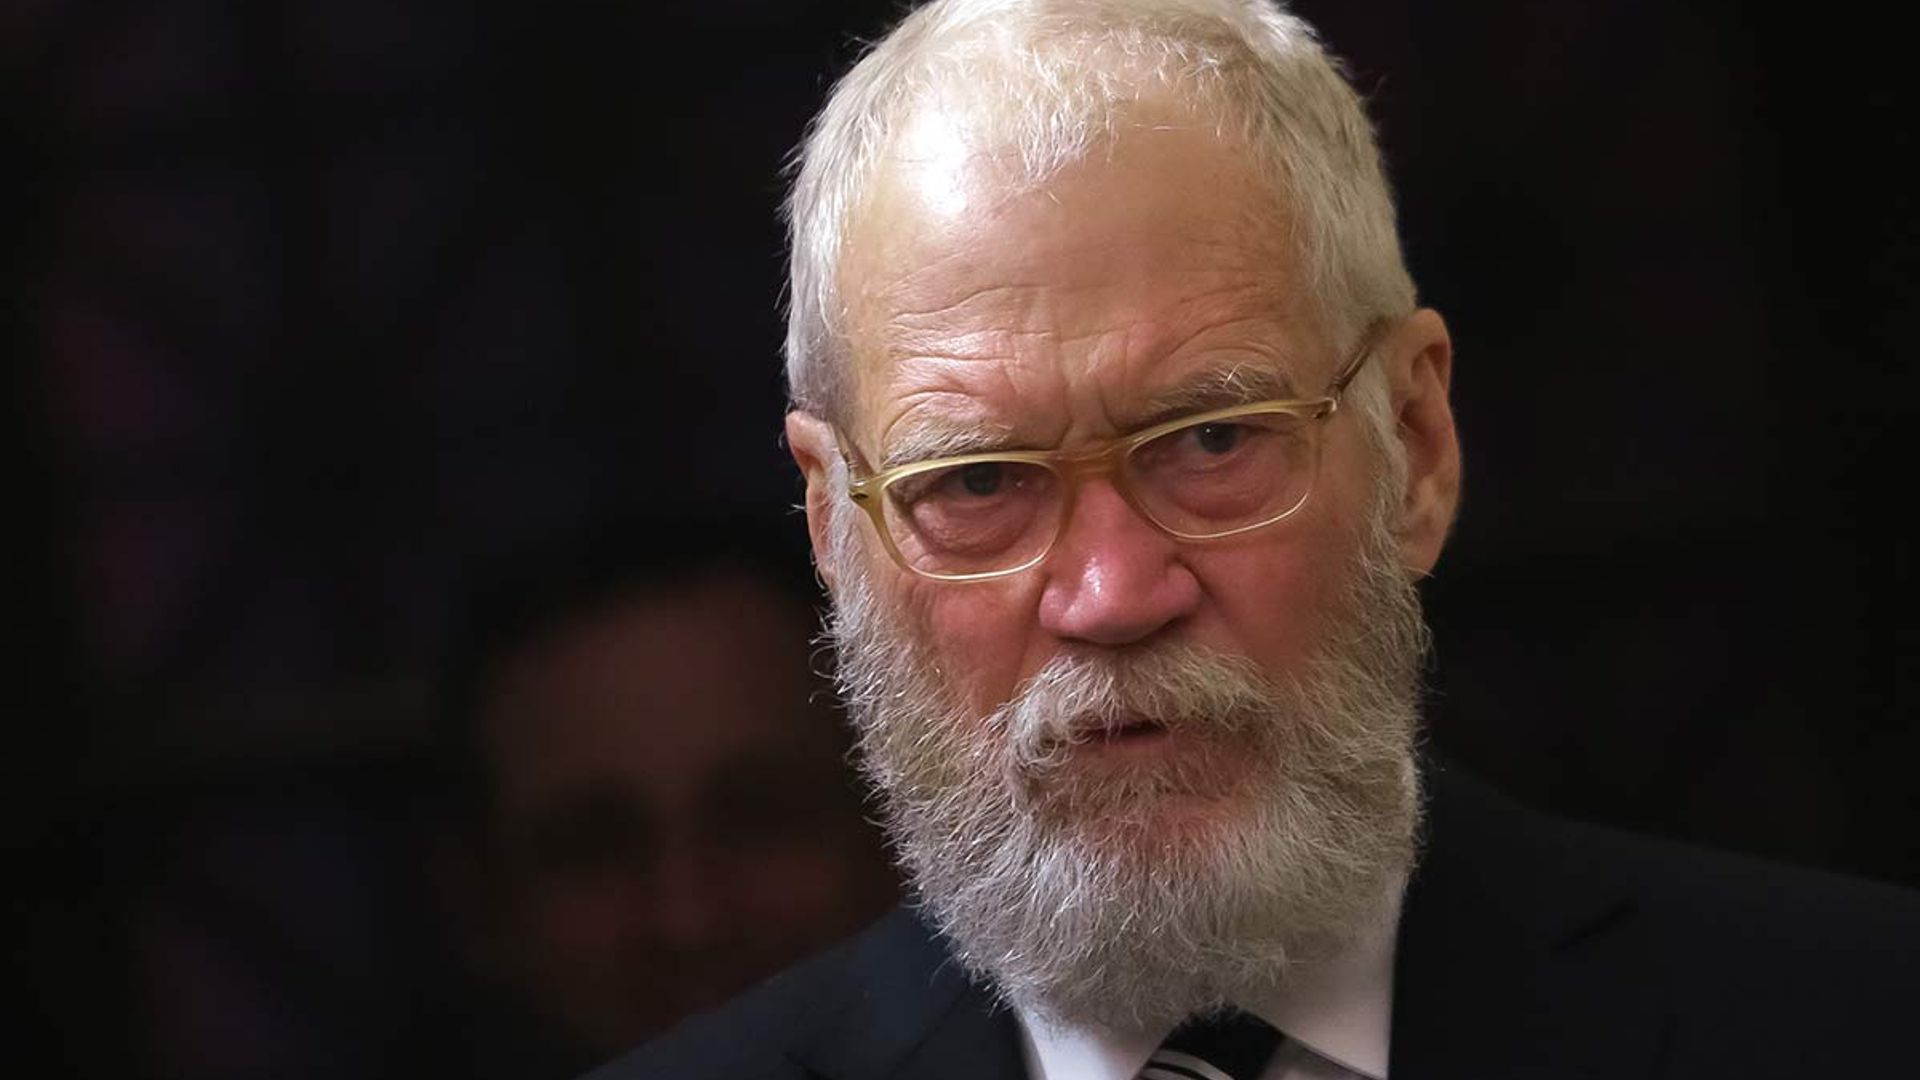 David Letterman consoled by fans after sharing news of tragic death